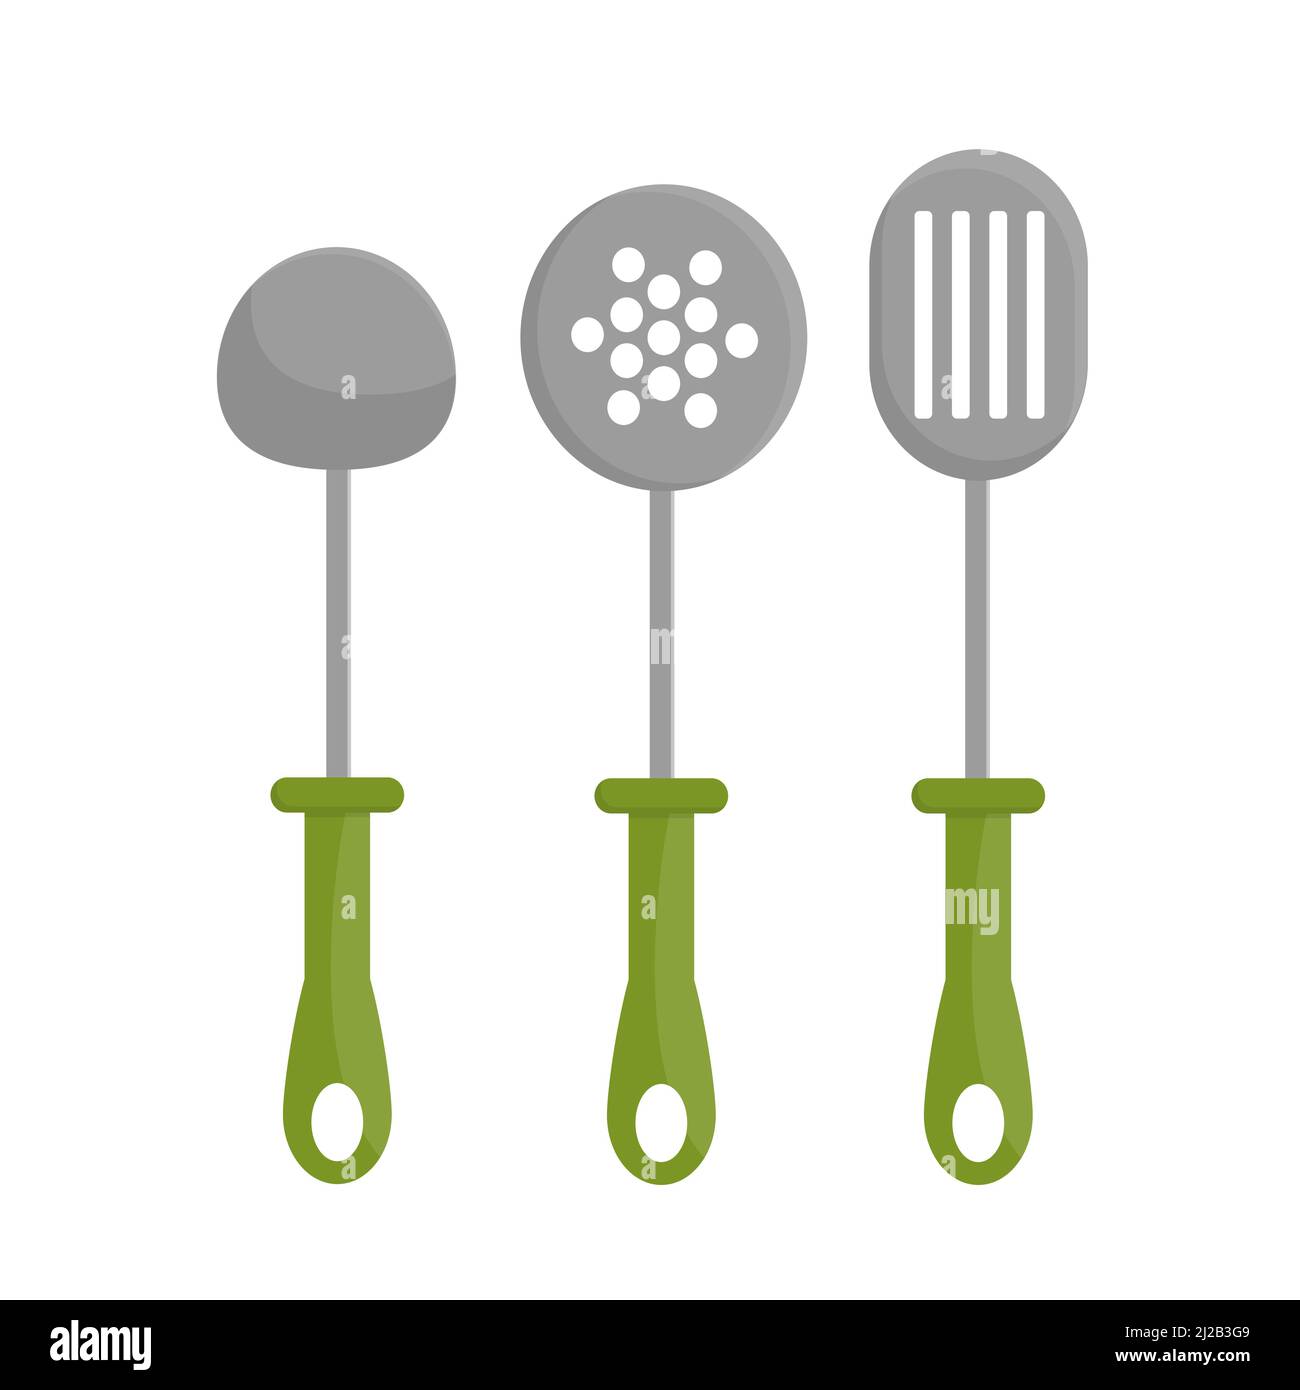 https://c8.alamy.com/comp/2J2B3G9/three-vector-illustration-with-soup-ladle-kitchen-spatula-spoon-with-lot-of-holes-green-handles-cartoon-on-white-kitchenware-cooking-concept-2J2B3G9.jpg